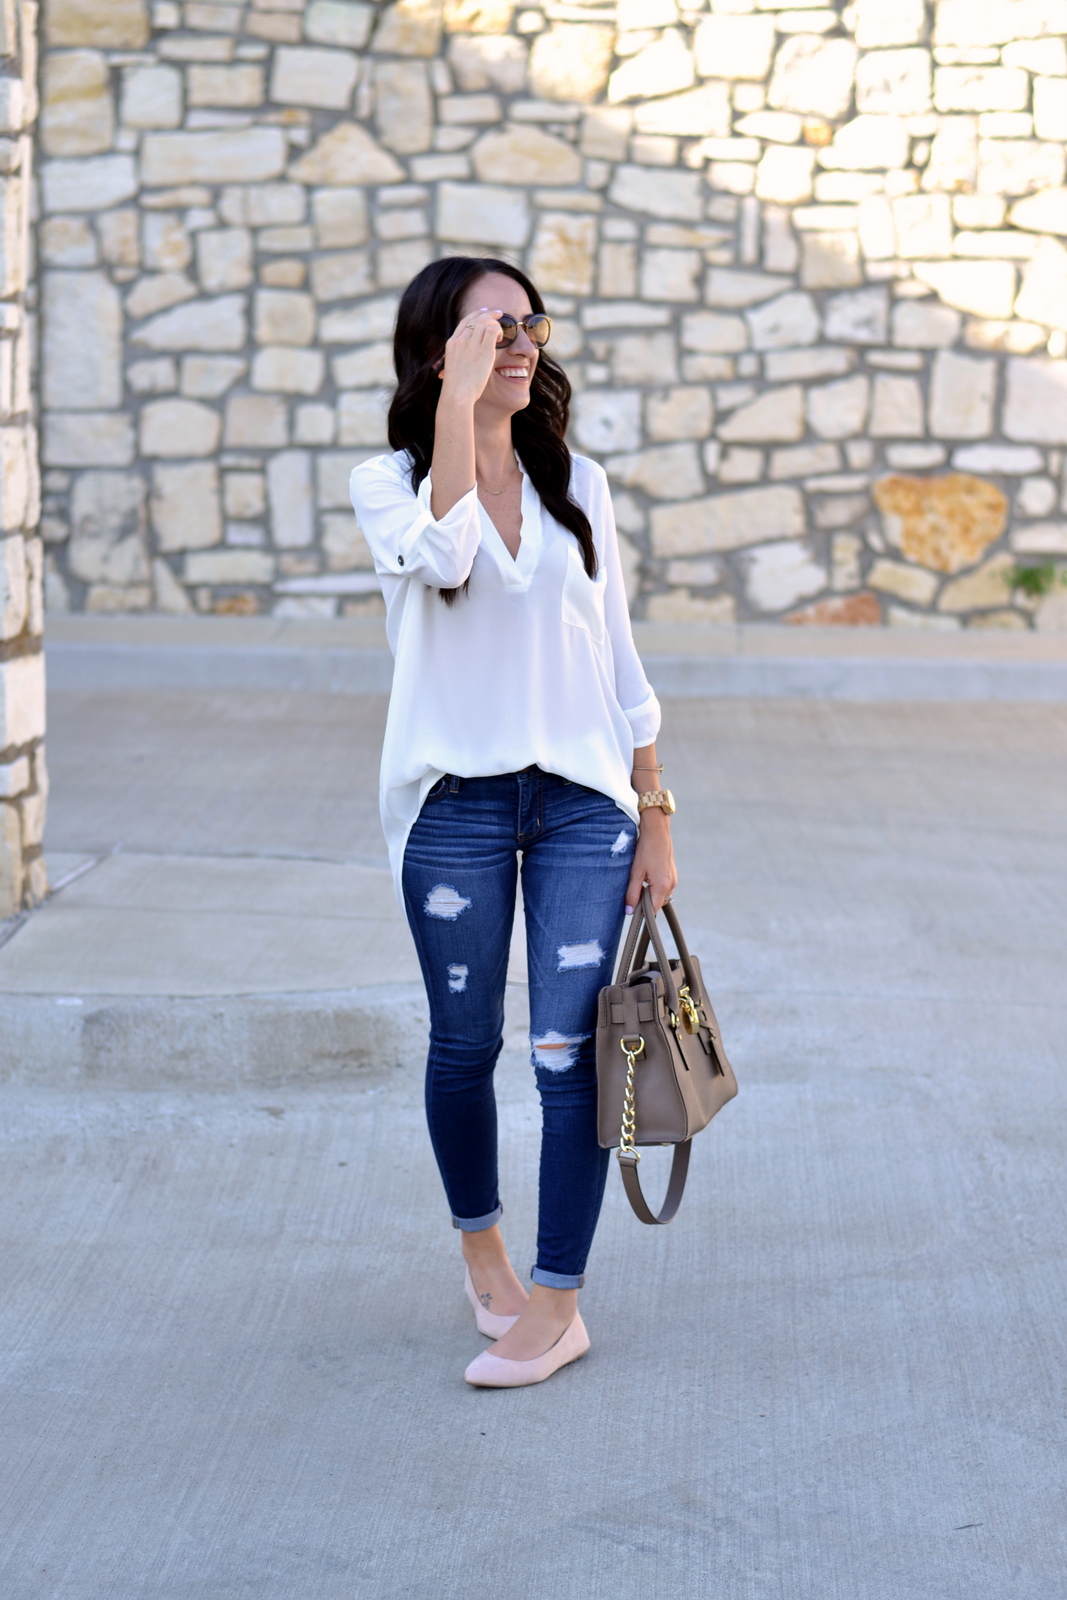 Casual Summer Look with nude flats, distressed denim and white tunic